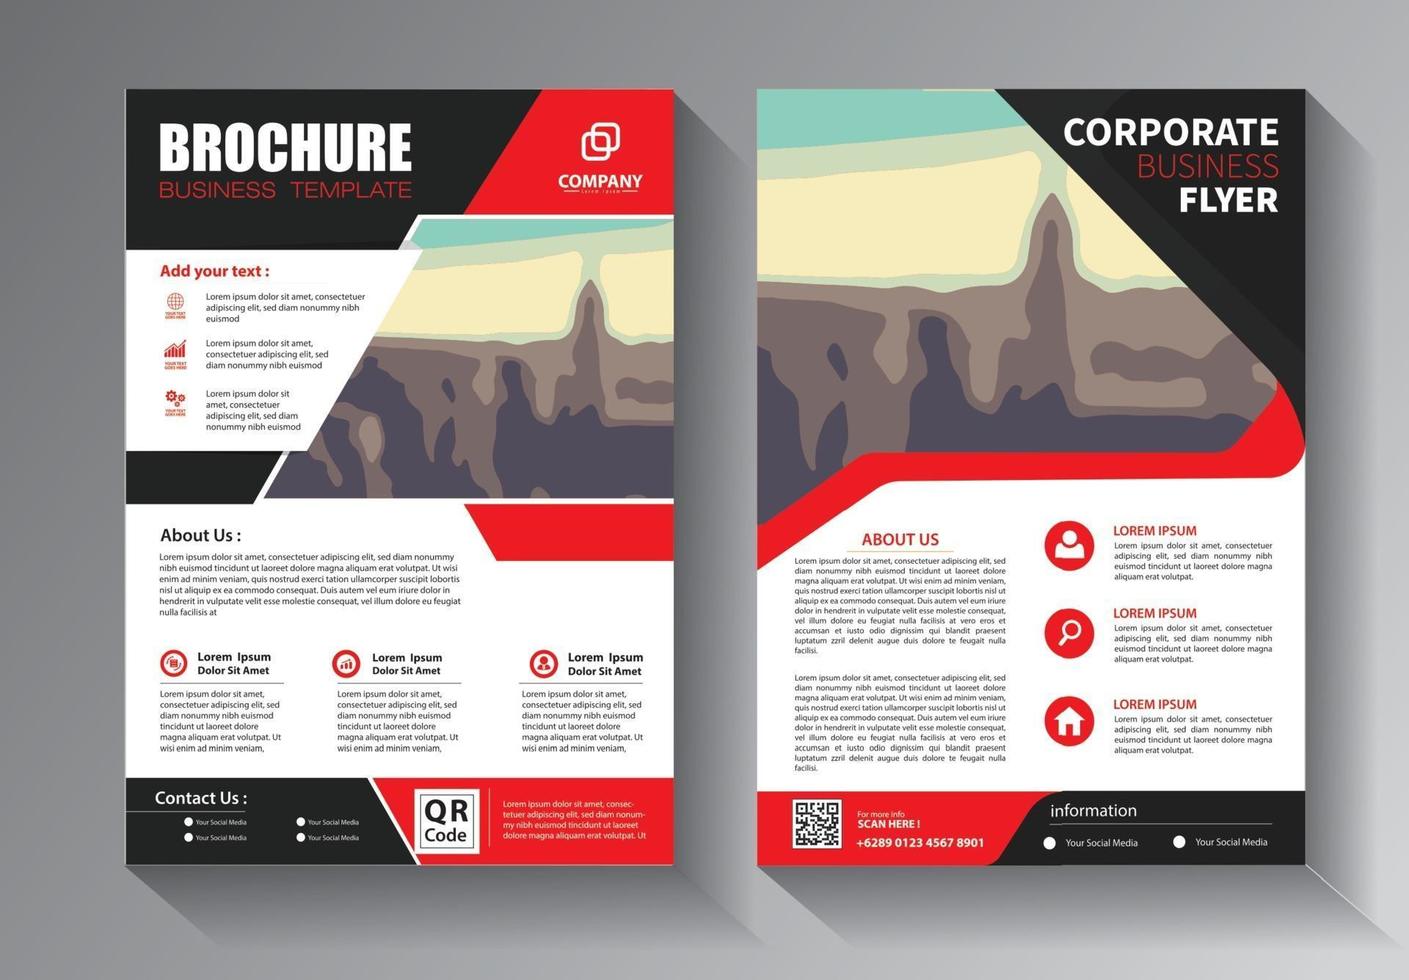 red flyer business template set vector